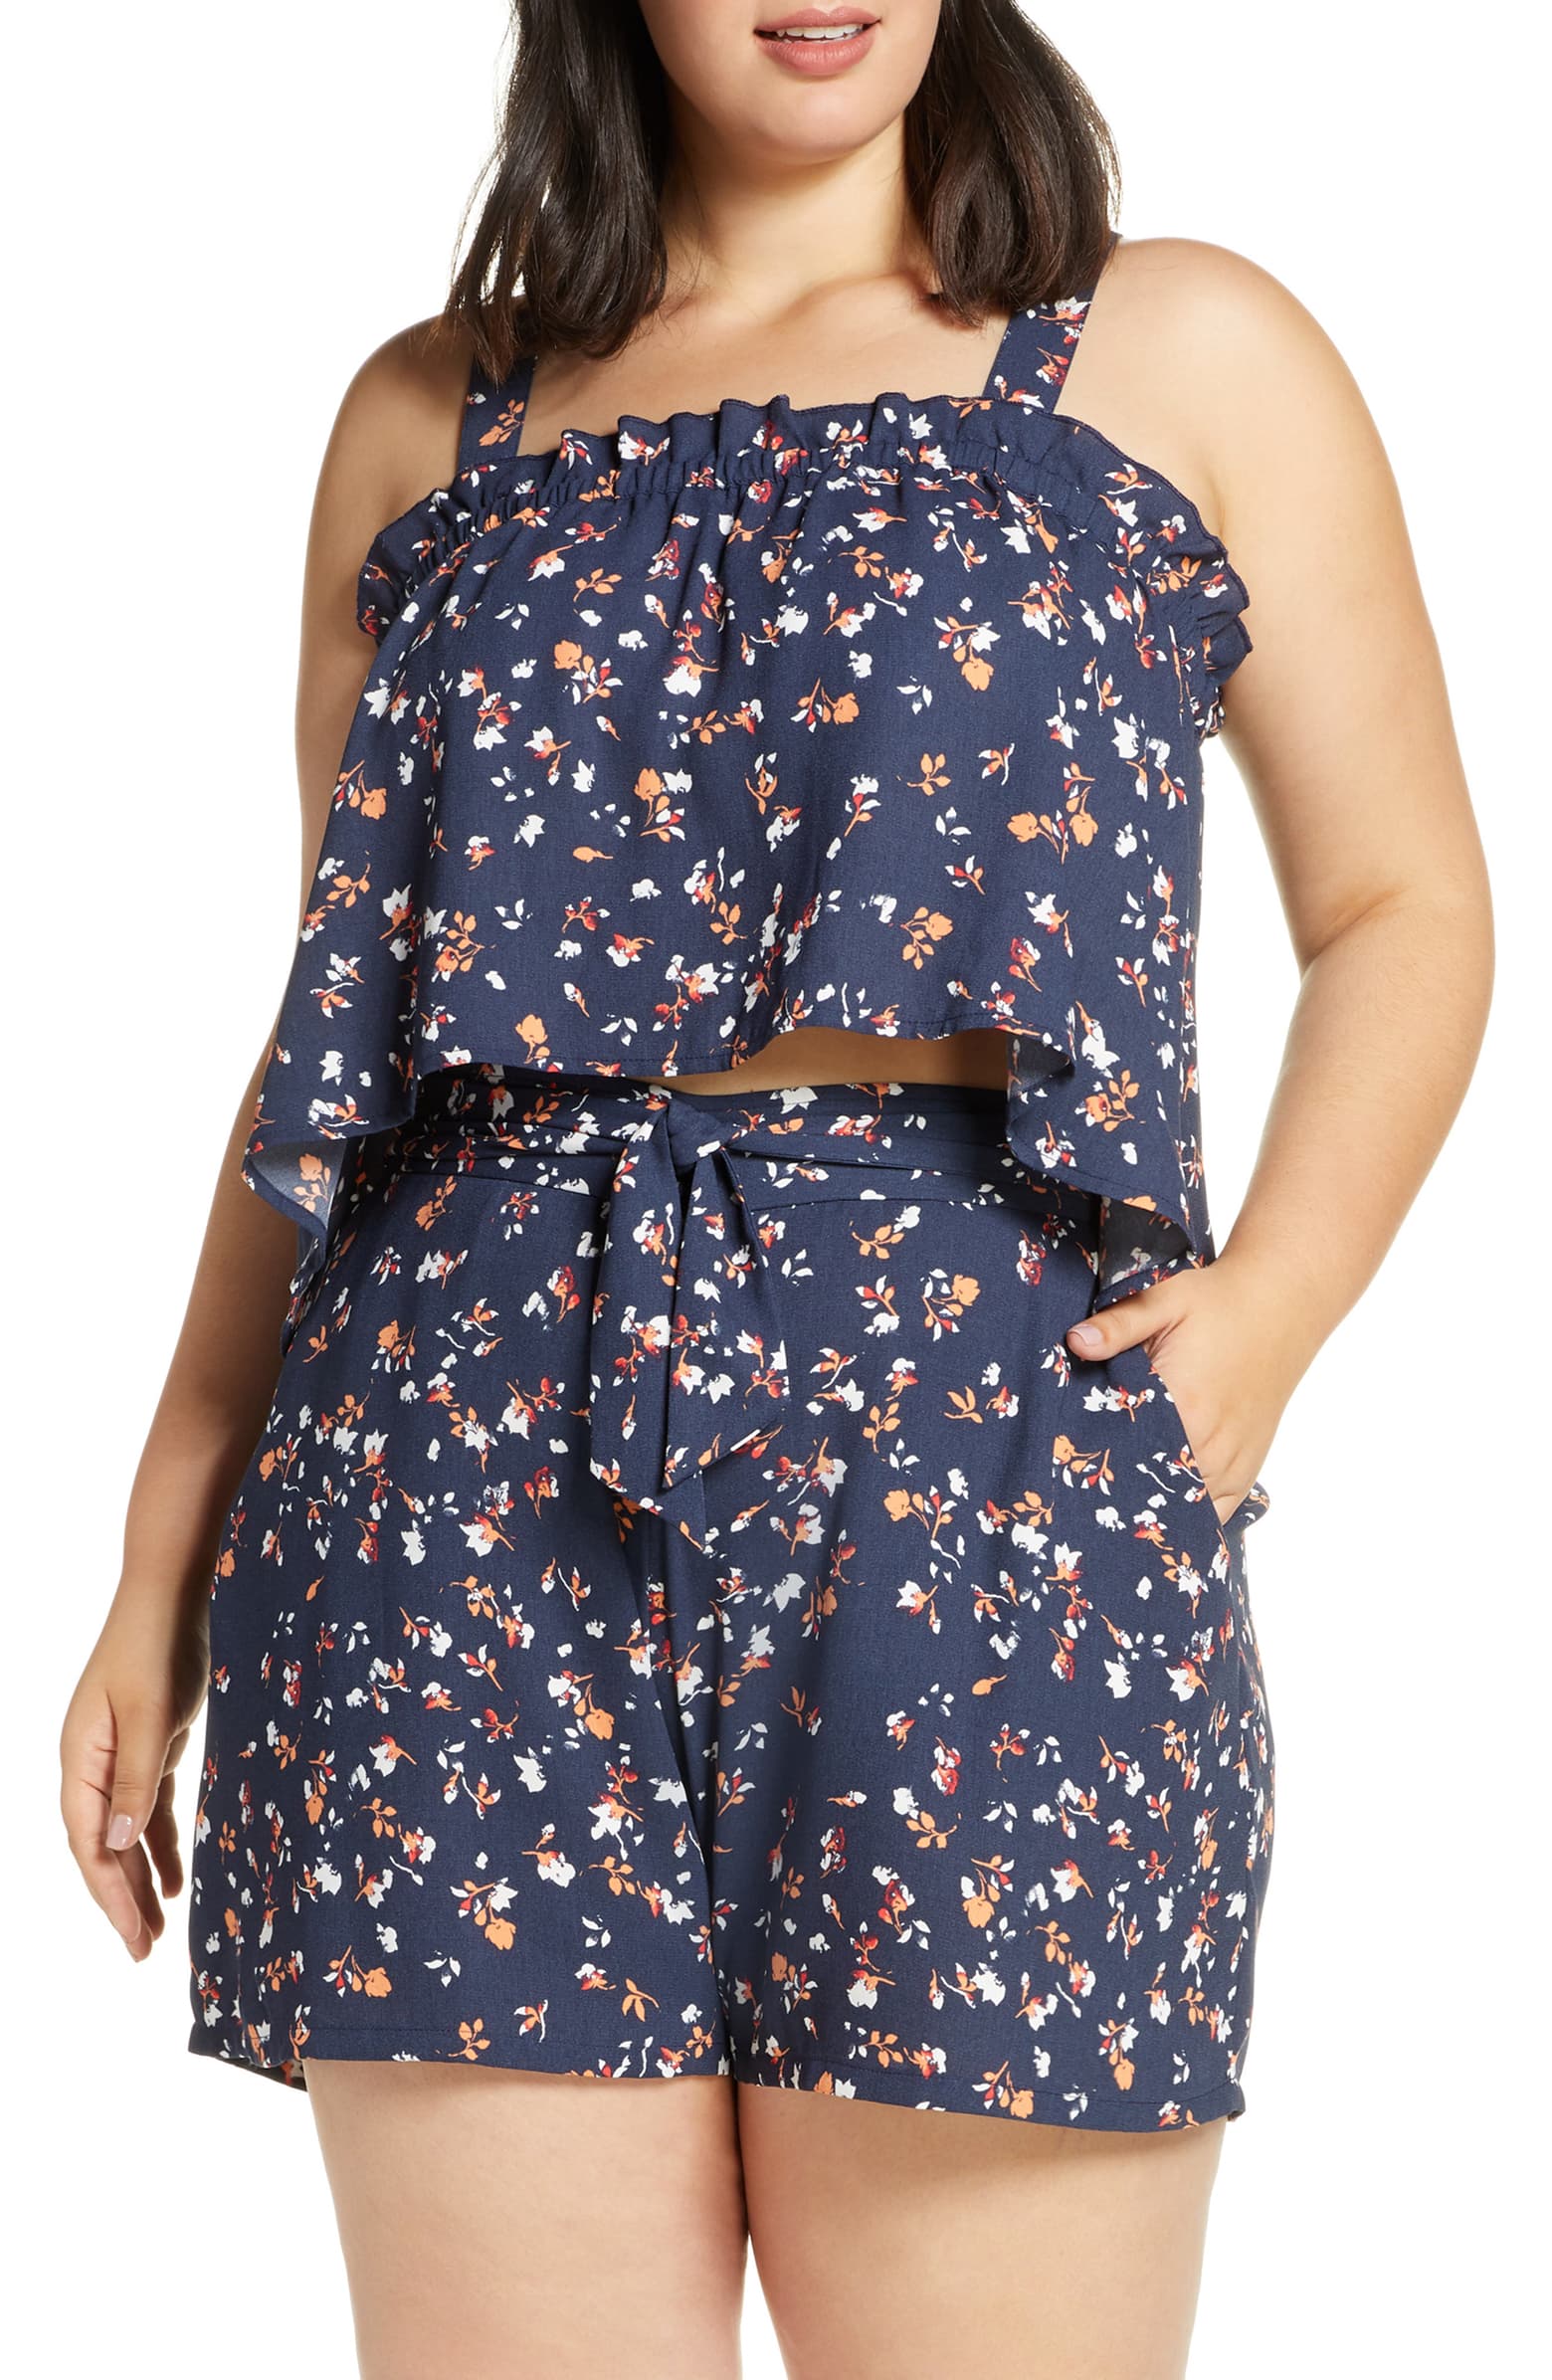 Oh Hey, Curvy Girl! We've Got the ESSENCE Festival Style Essentials You Can't Do Without